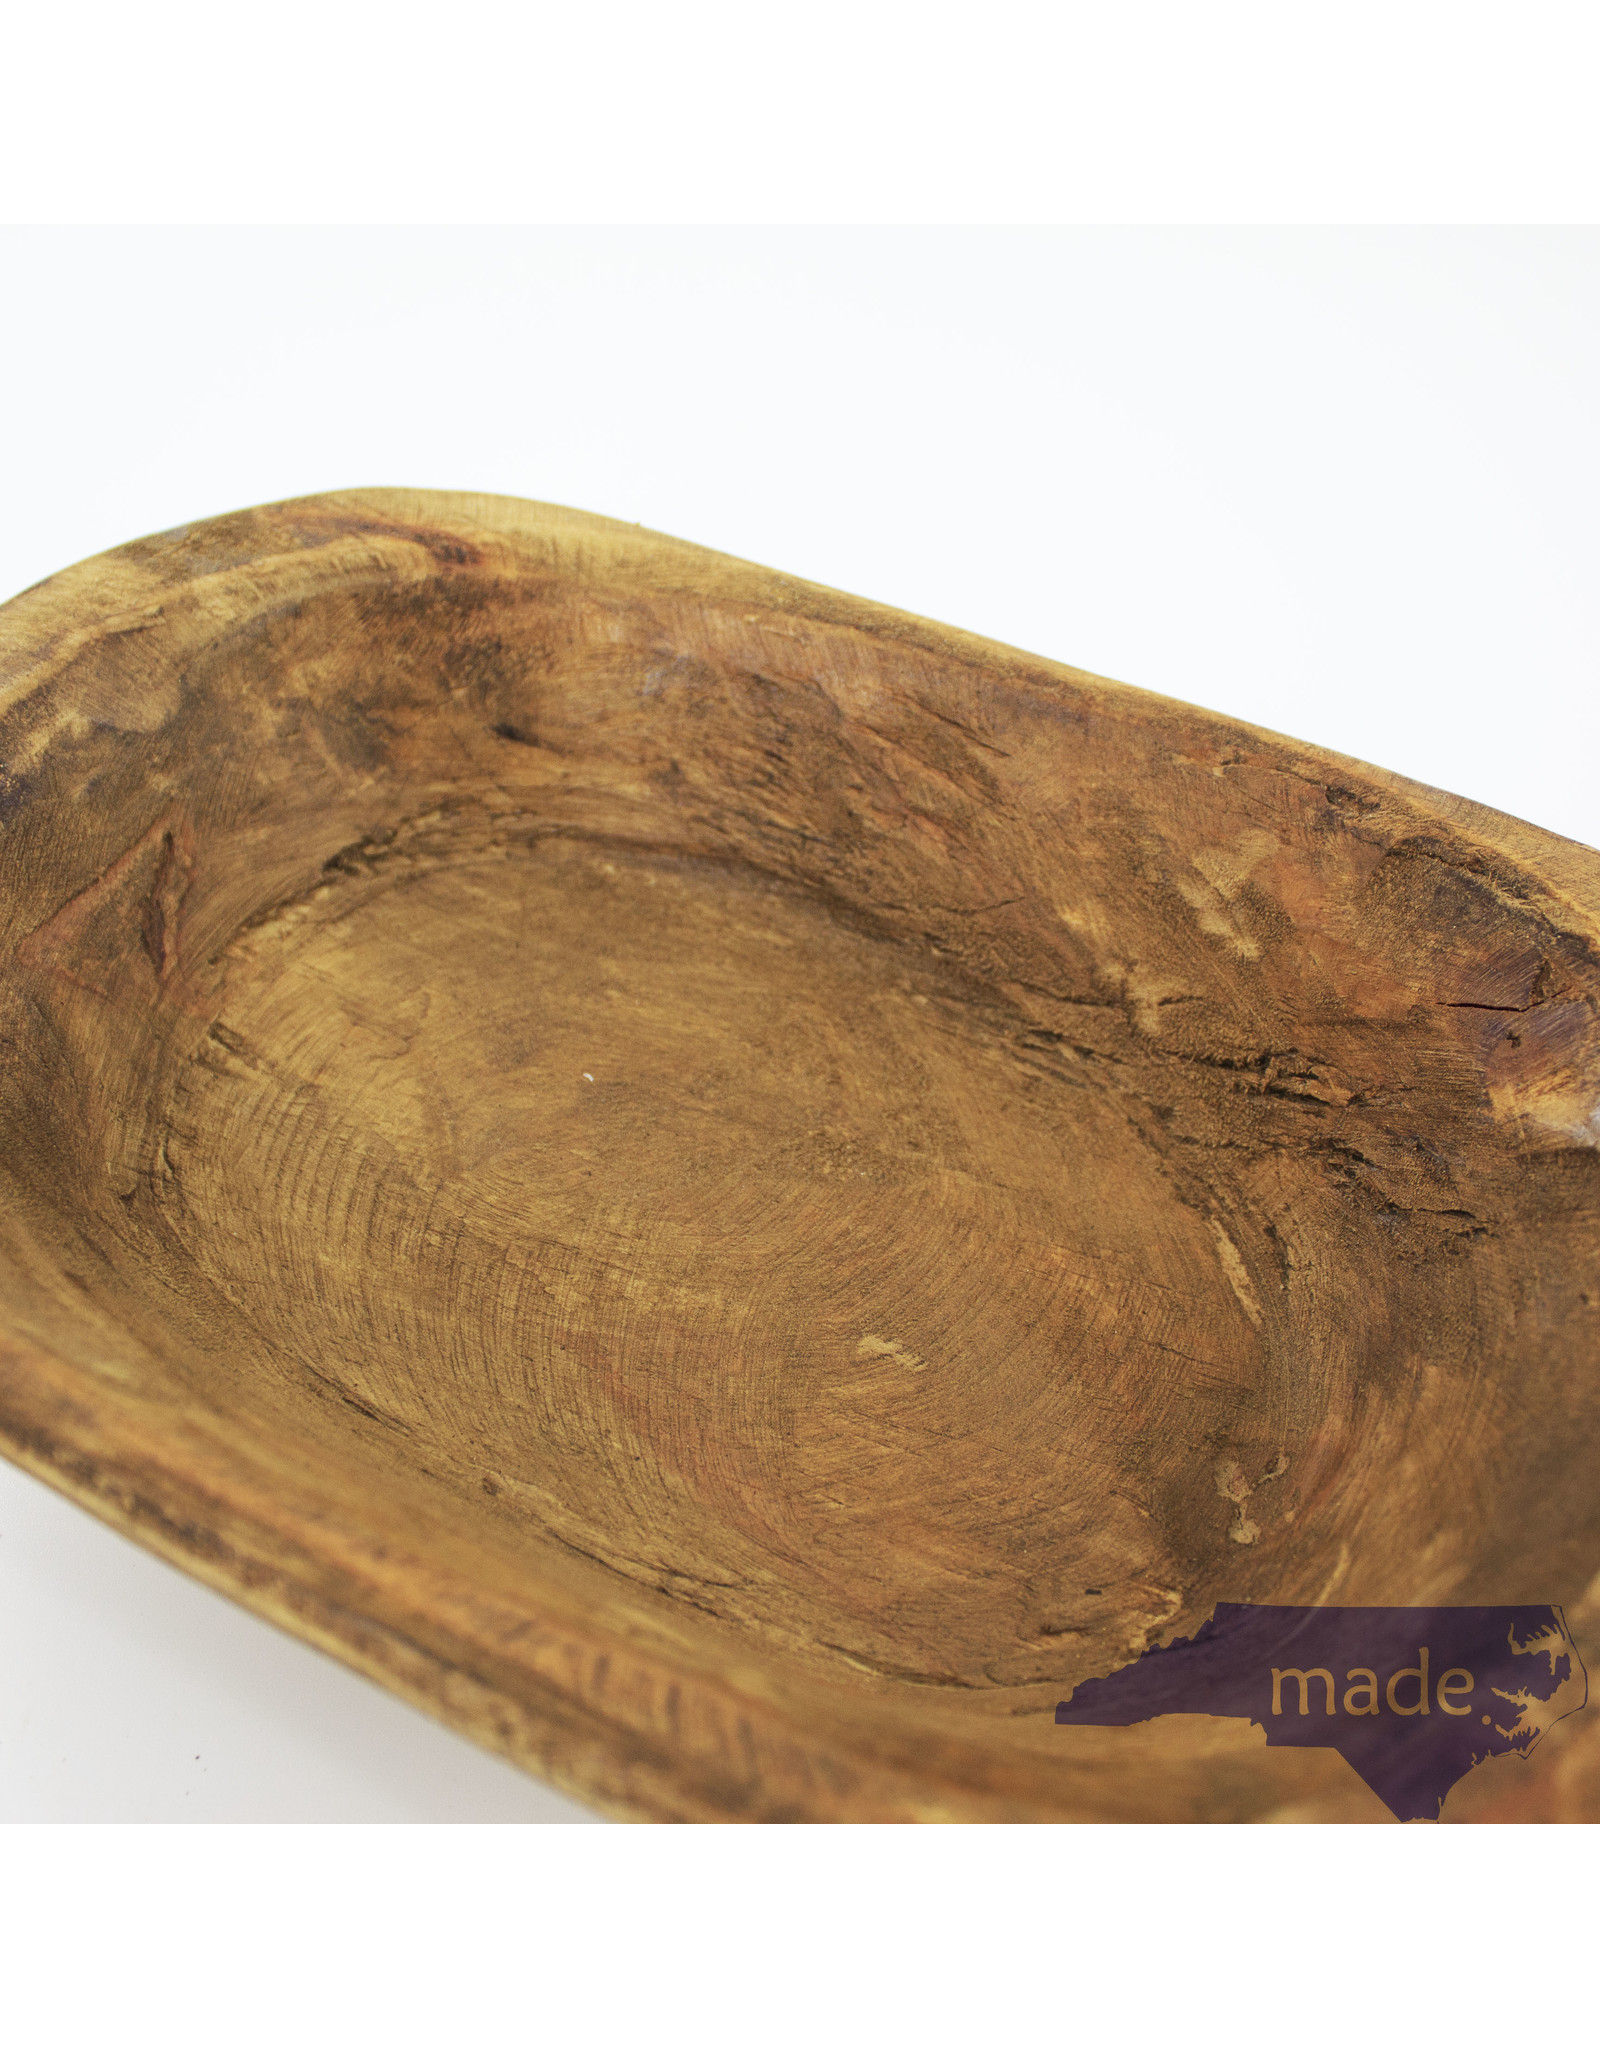 Off the Grid Designs Medium Oval Dough Bowl 20 in. x 10 in. - Off the Grid Designs